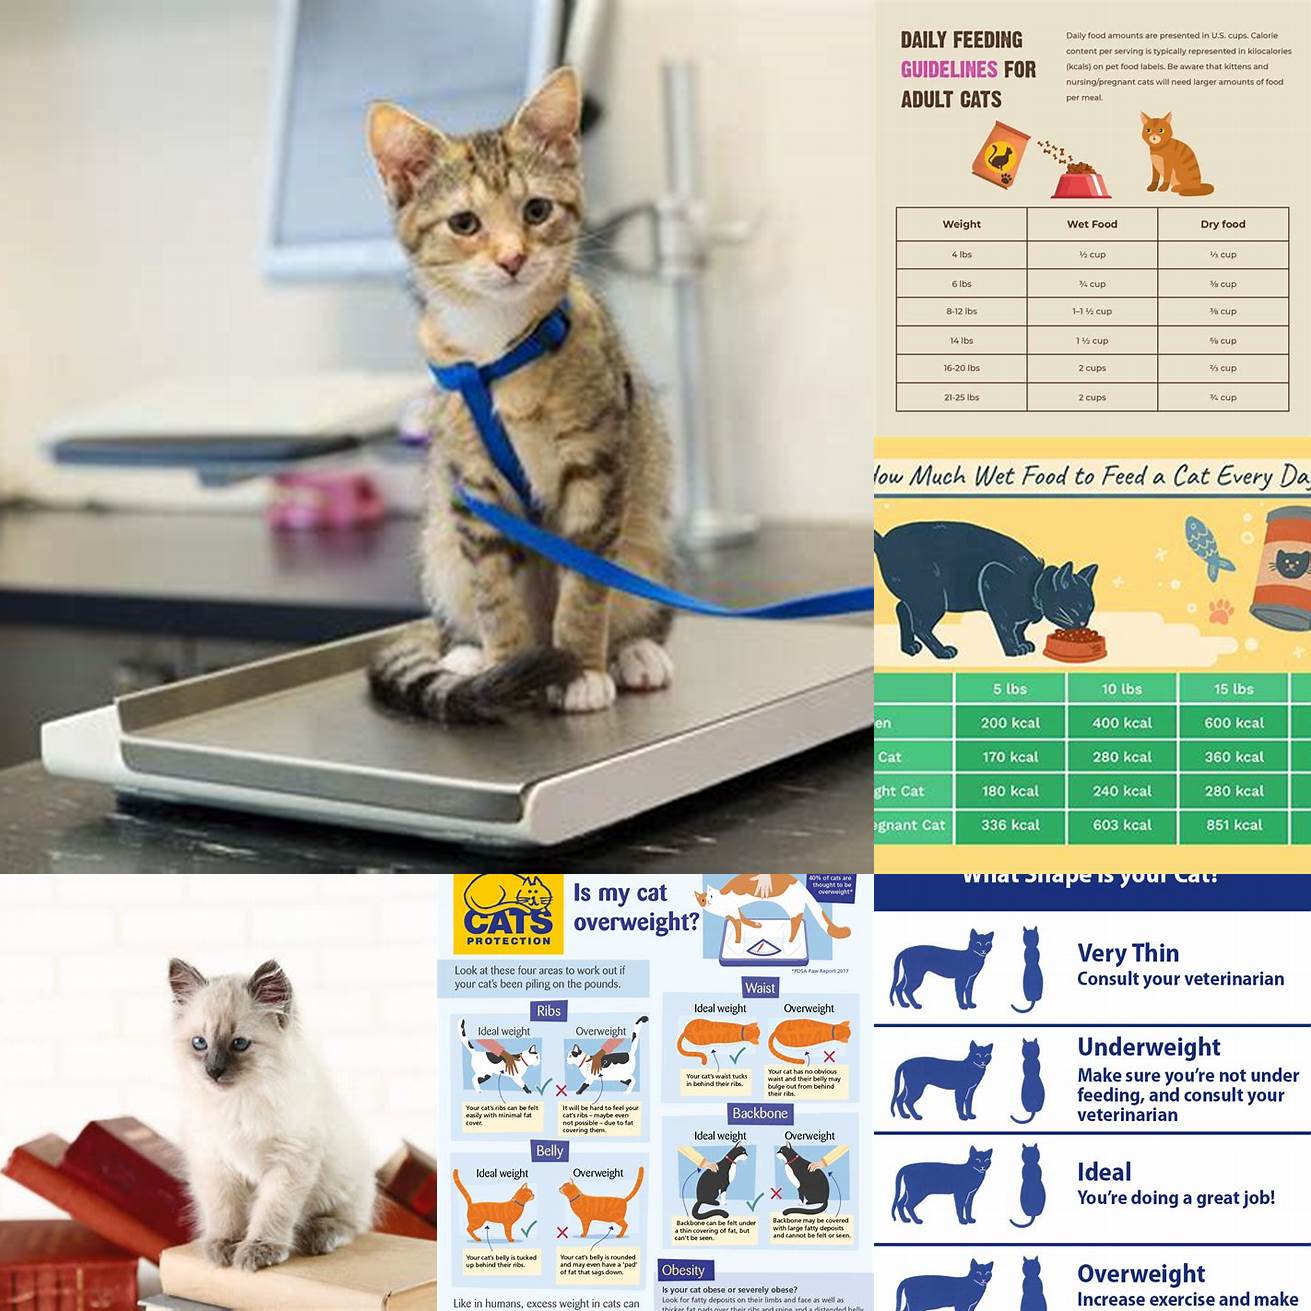 Monitor your cats weight and adjust their food intake as needed to maintain a healthy weight